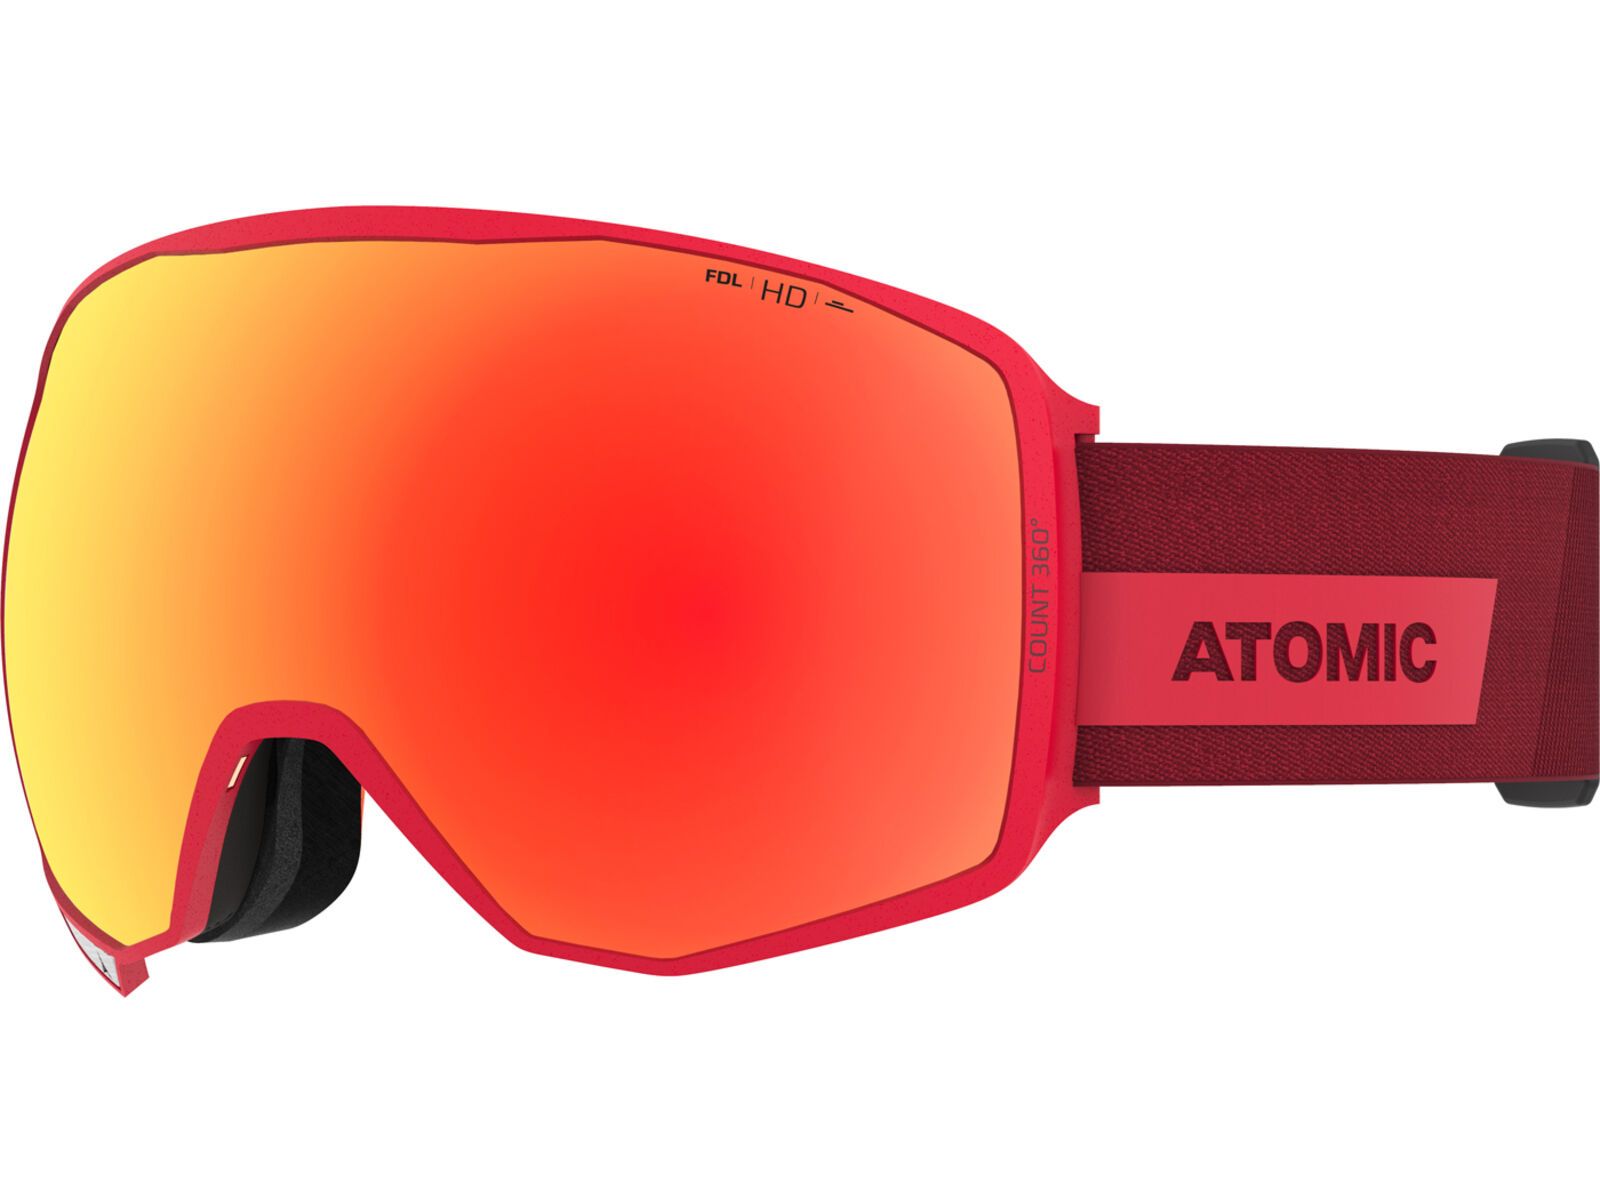 Atomic Count 360° HD - Red, red | Bild 1